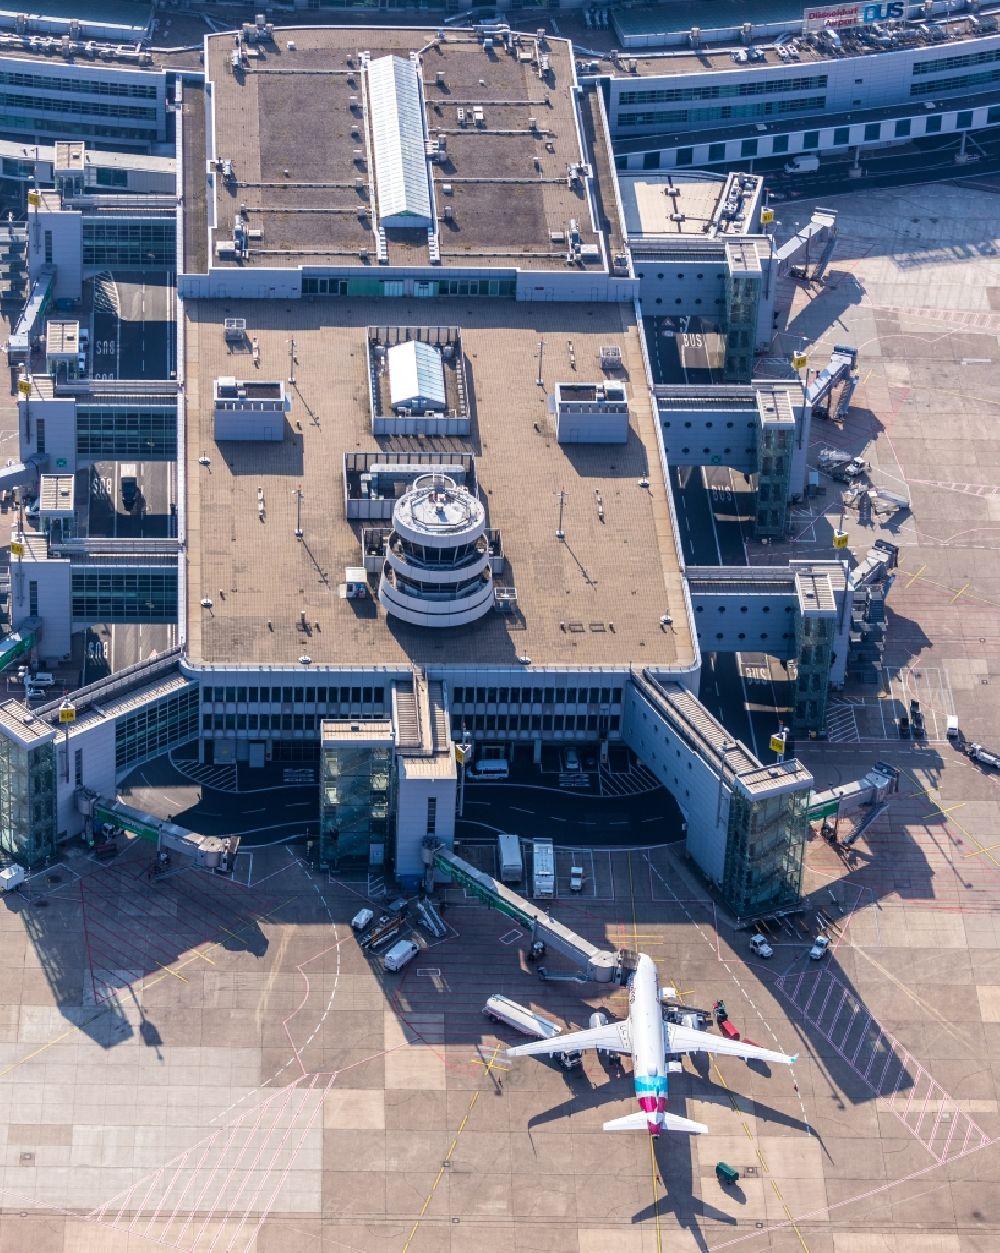 Düsseldorf from the bird's eye view: Dispatch building and terminals on the premises of the airport in Duesseldorf in the state North Rhine-Westphalia, Germany